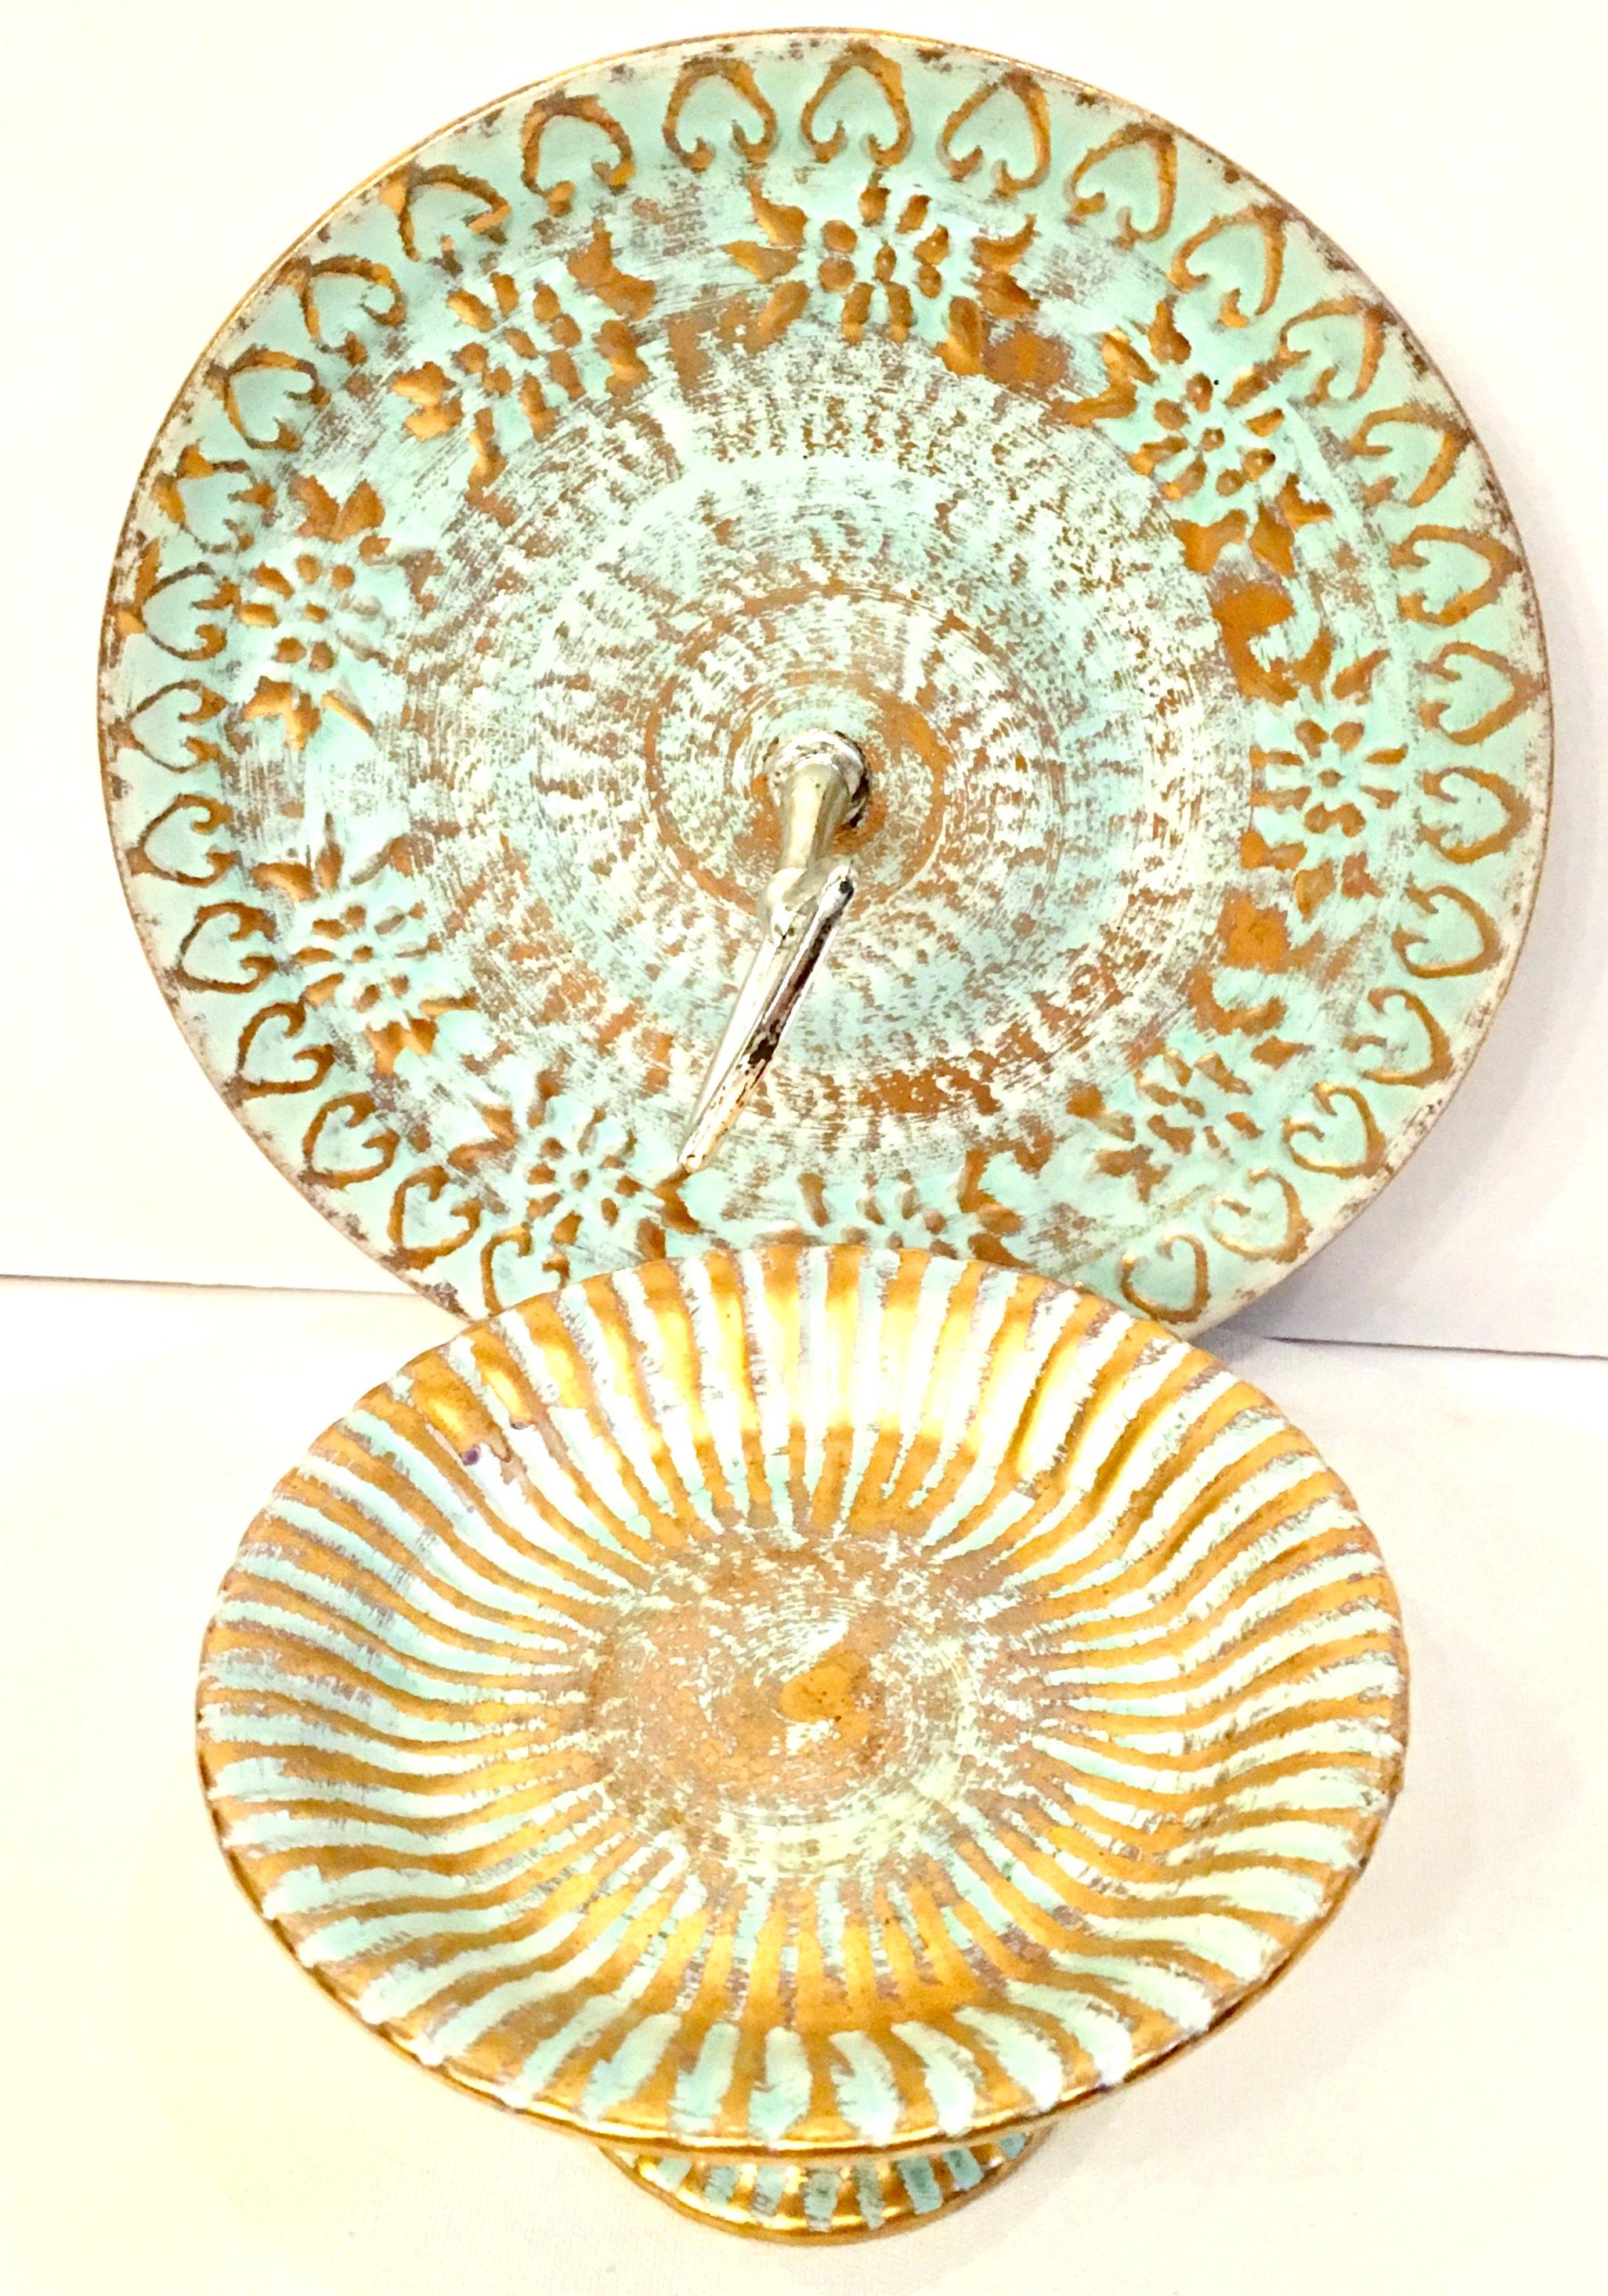 Mid-20th century set of two ceramic hand painted aqua and 22-karat gold serving pieces by Stangl Pottery. This two piece set includes a pedestal plate and chrome handled serving platter. Each pieces is signed on the underside, Stangl.
The pedestal